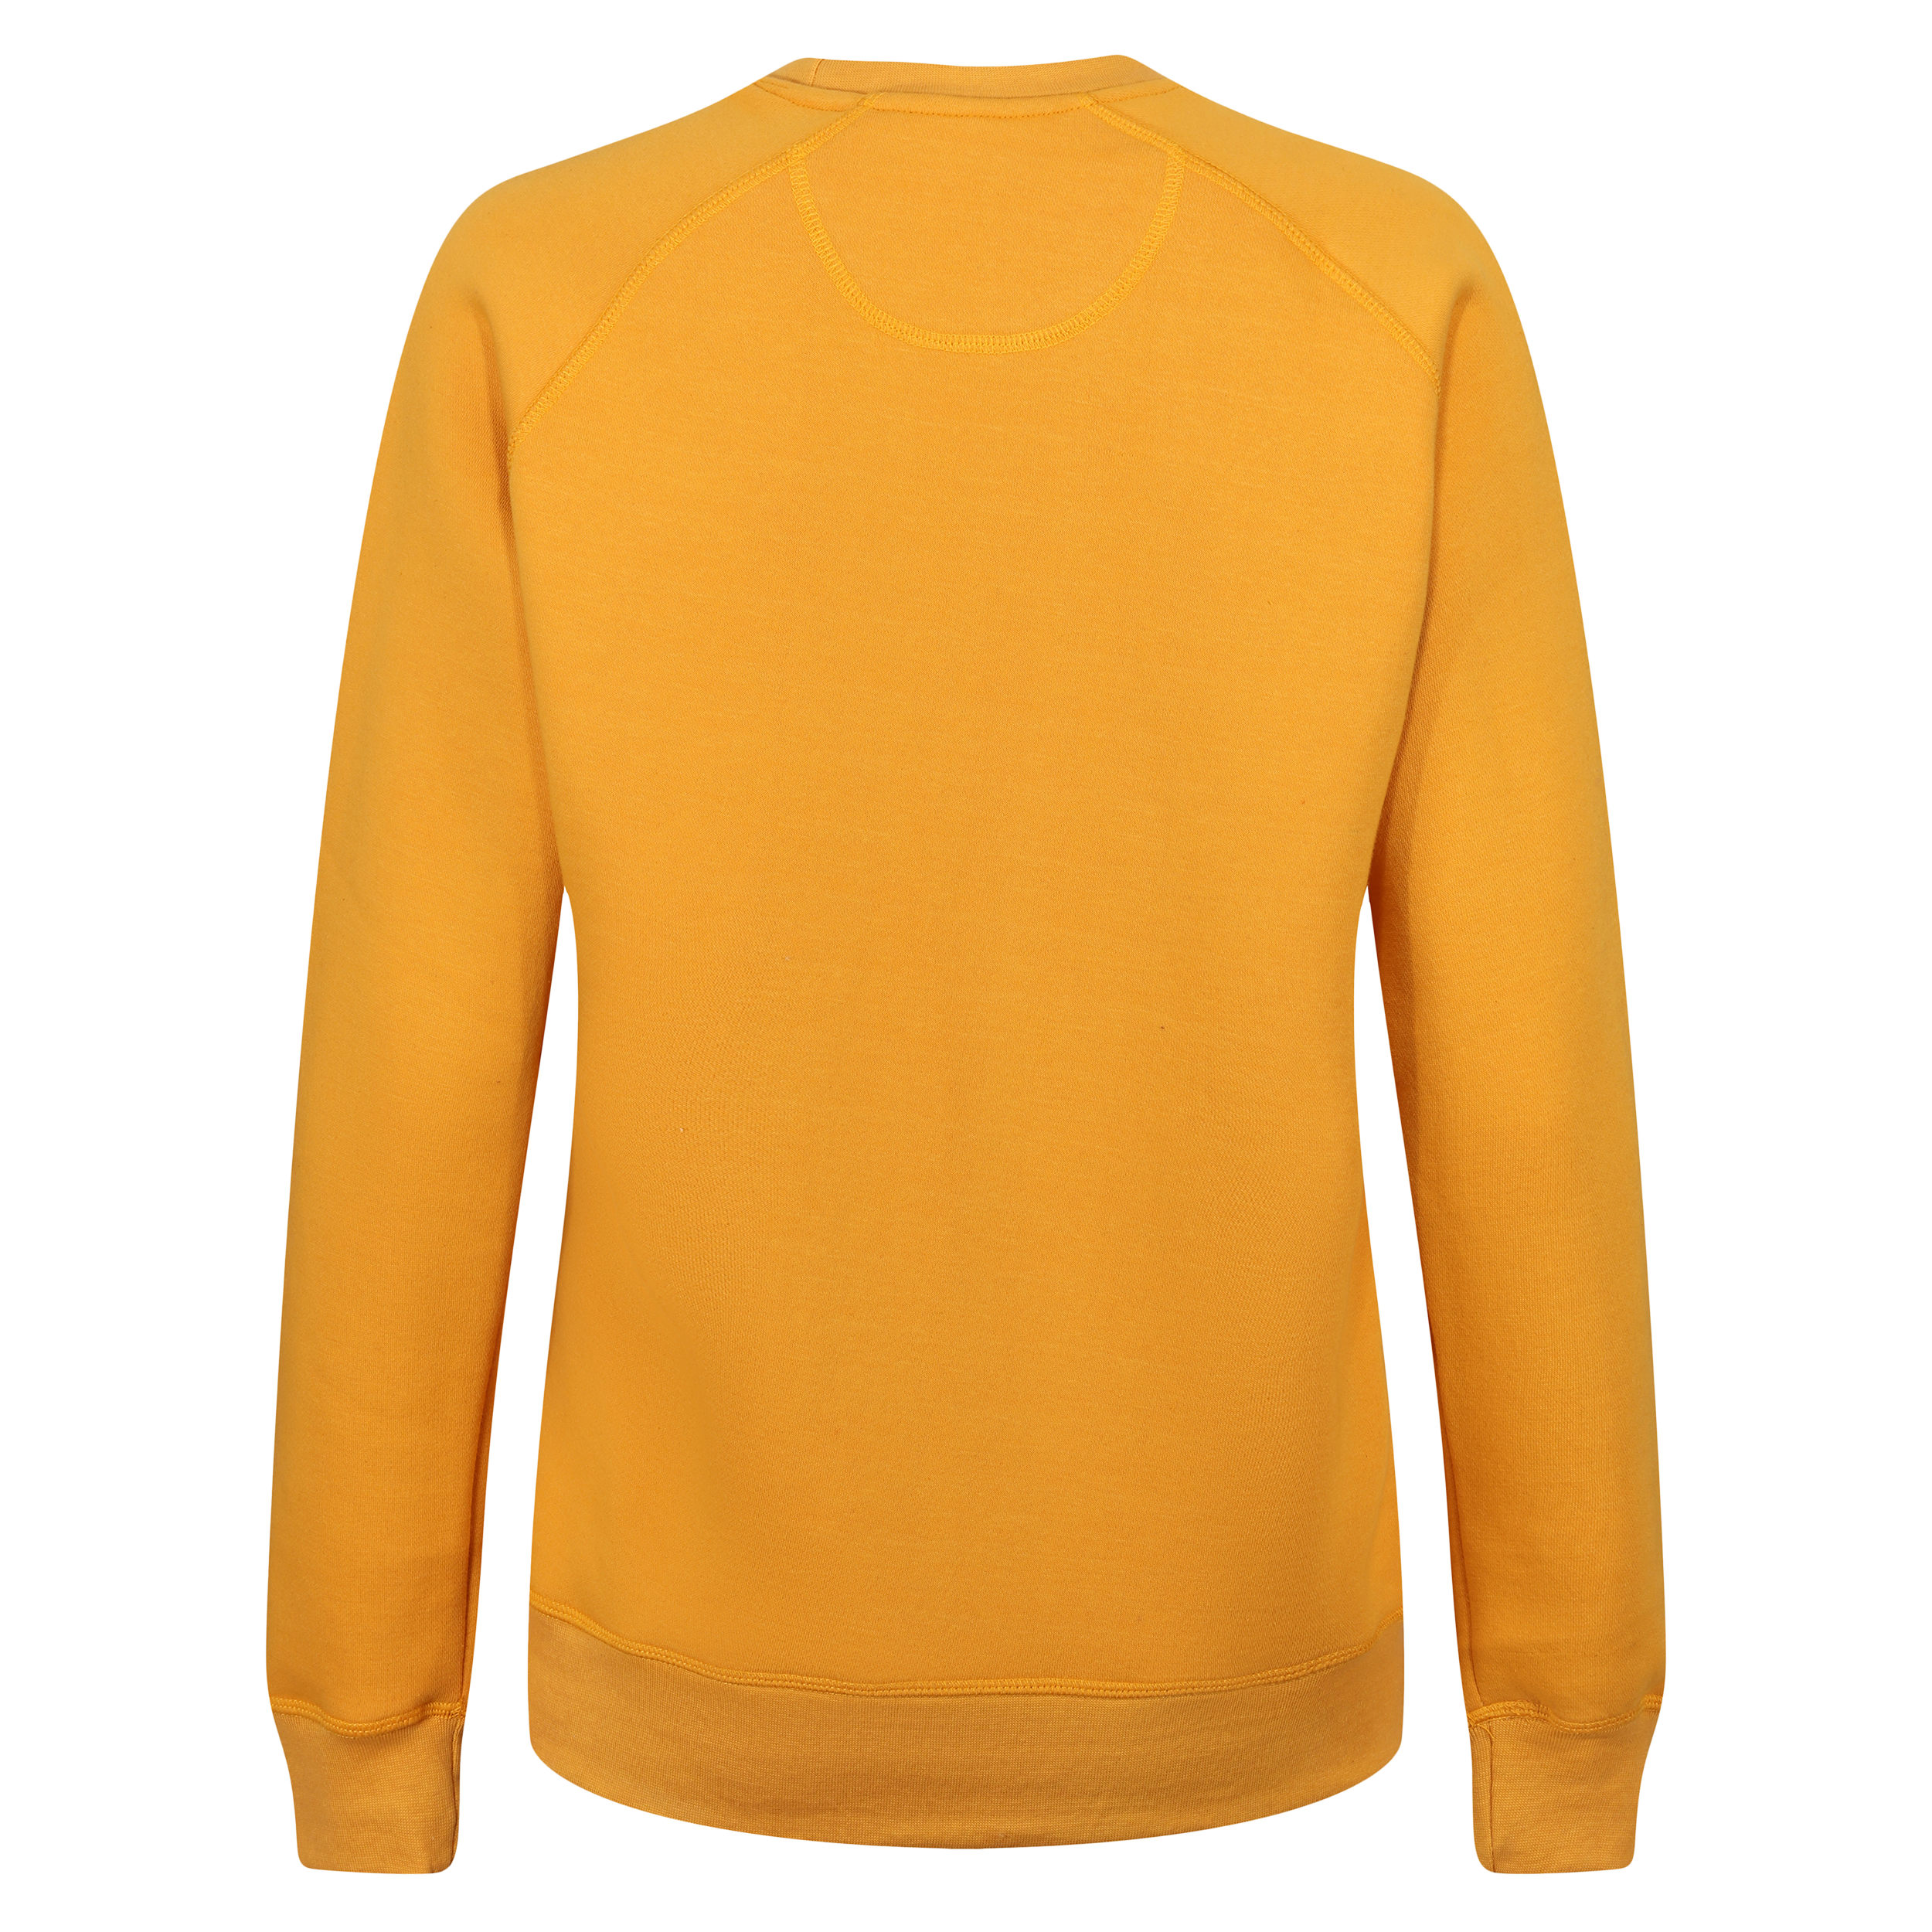 The back of a mustard yellow colour lady sweatshirt with Moto Girl 3D logo